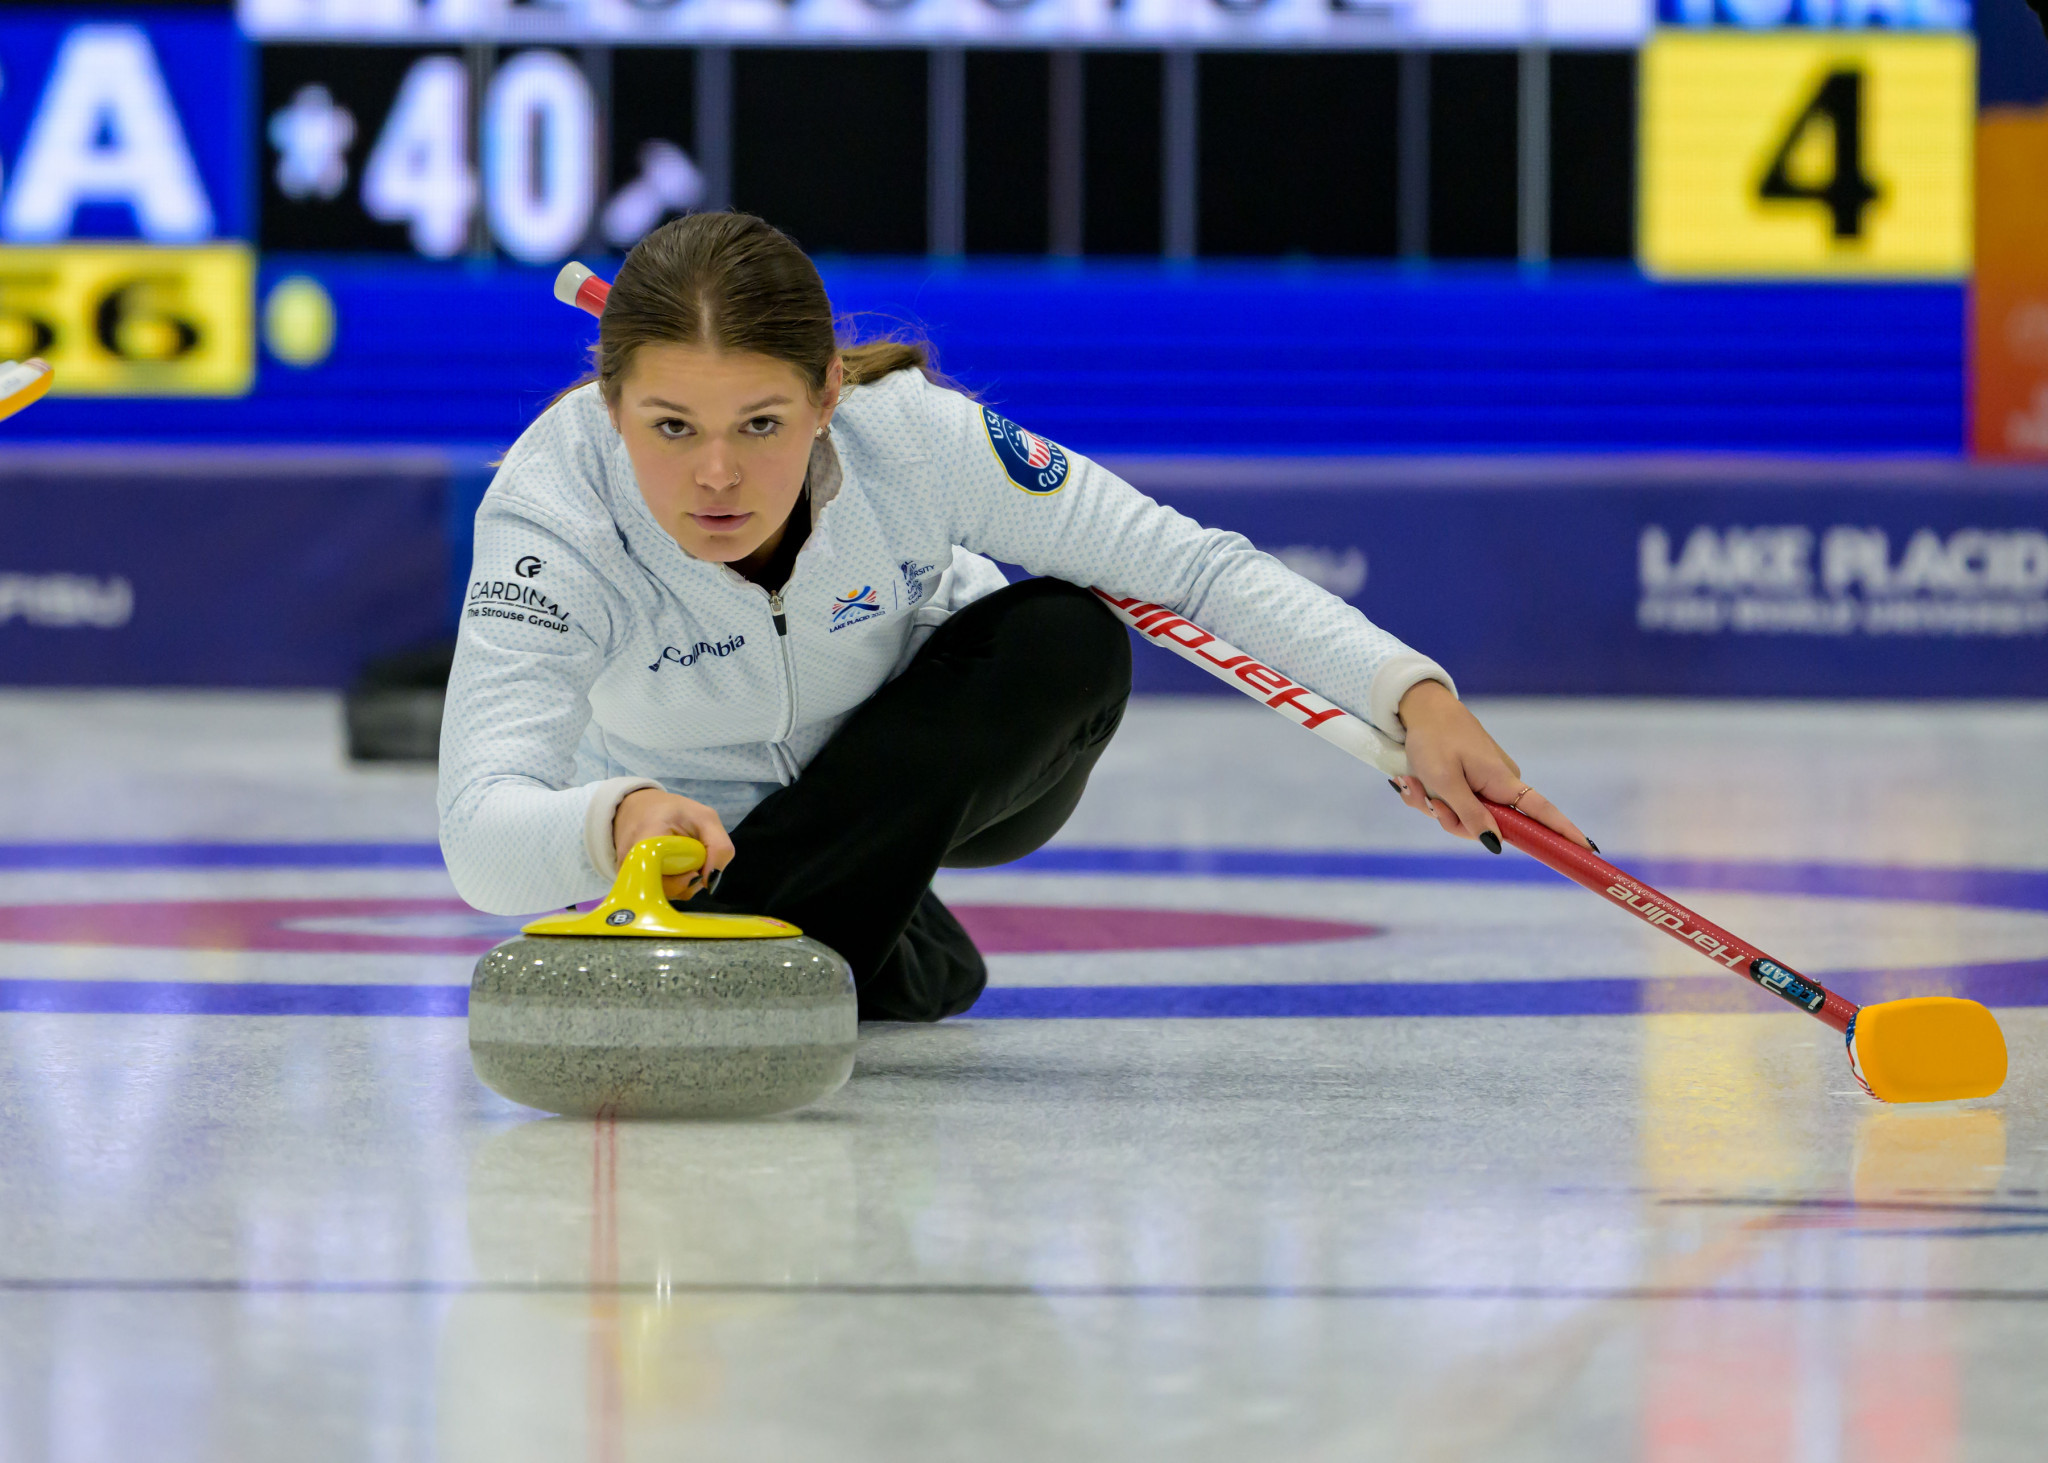 The United States moved up to joint-second in the women's curling round robin following their 7-3 victory against Britain ©FISU